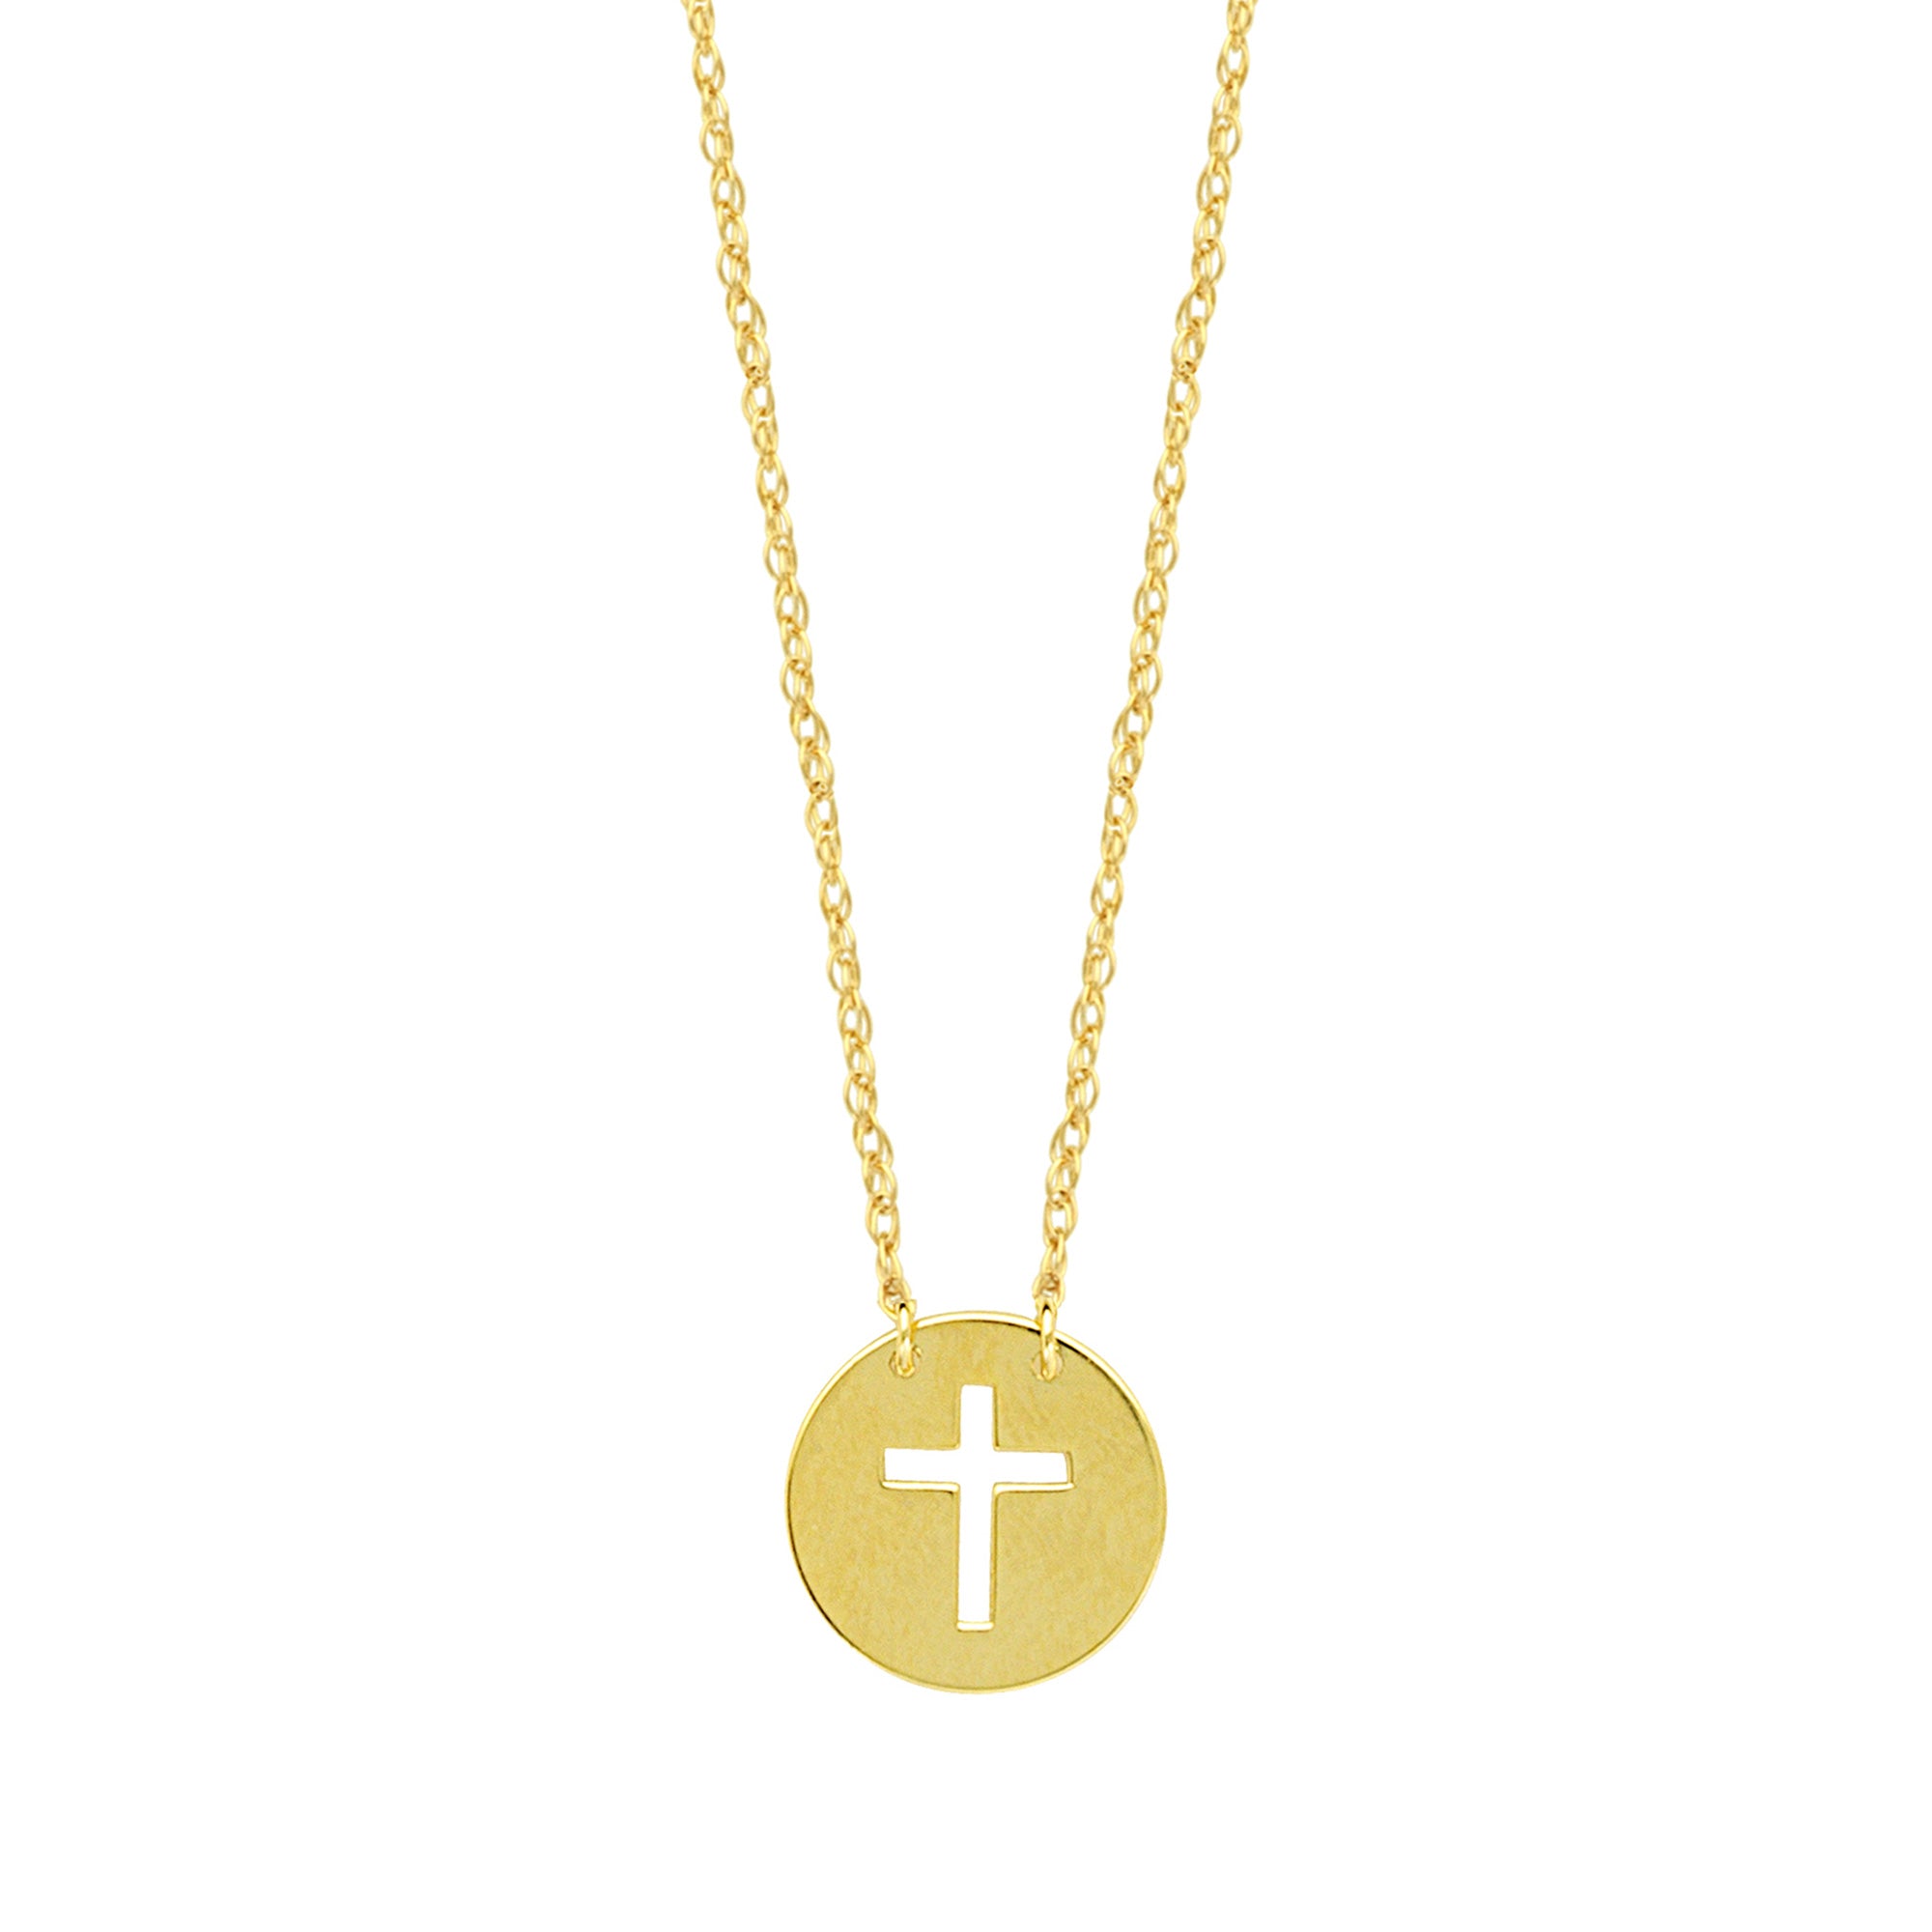 14K Yellow Gold Mini Cross Pendant Necklace, 16" To 18" Adjustable fine designer jewelry for men and women